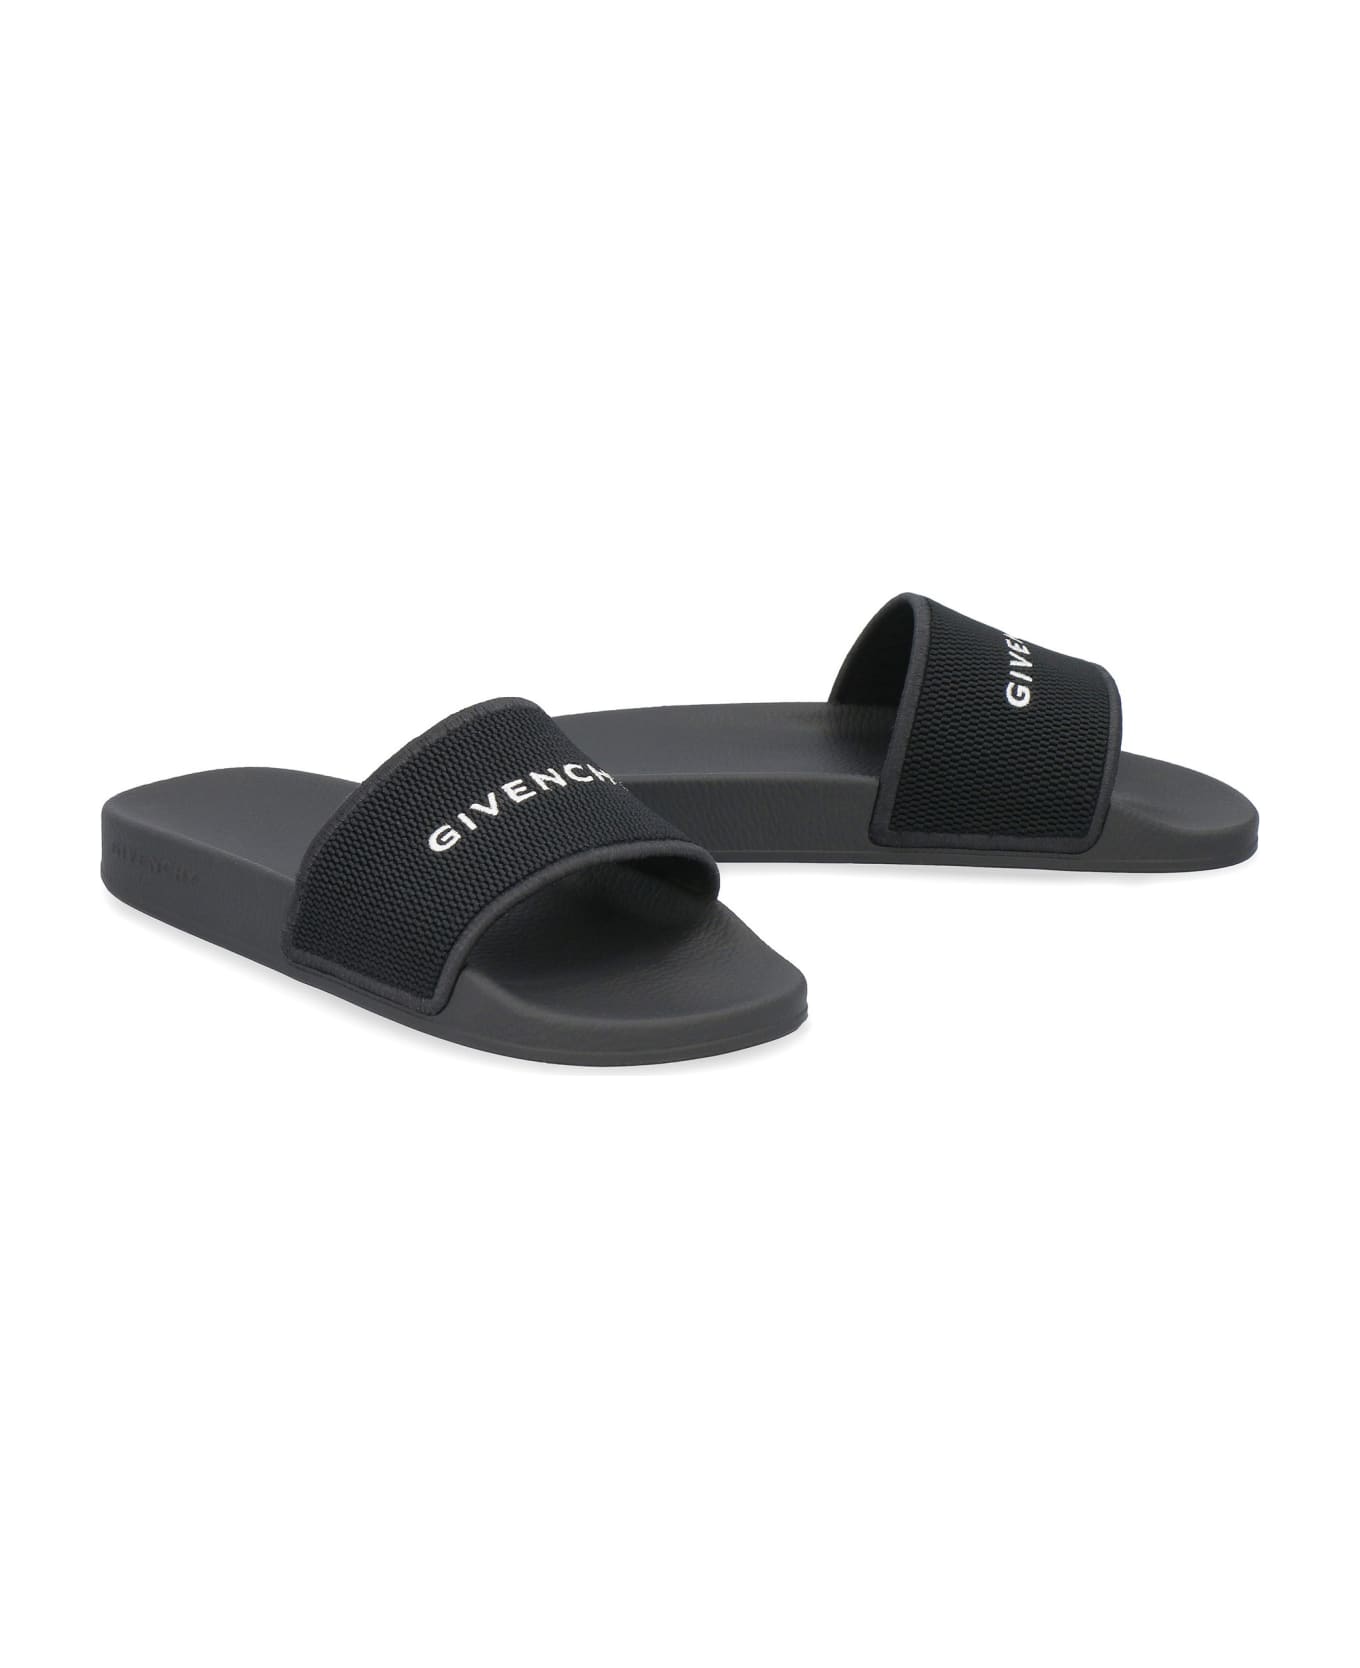 Givenchy Rubber Slides - Nero